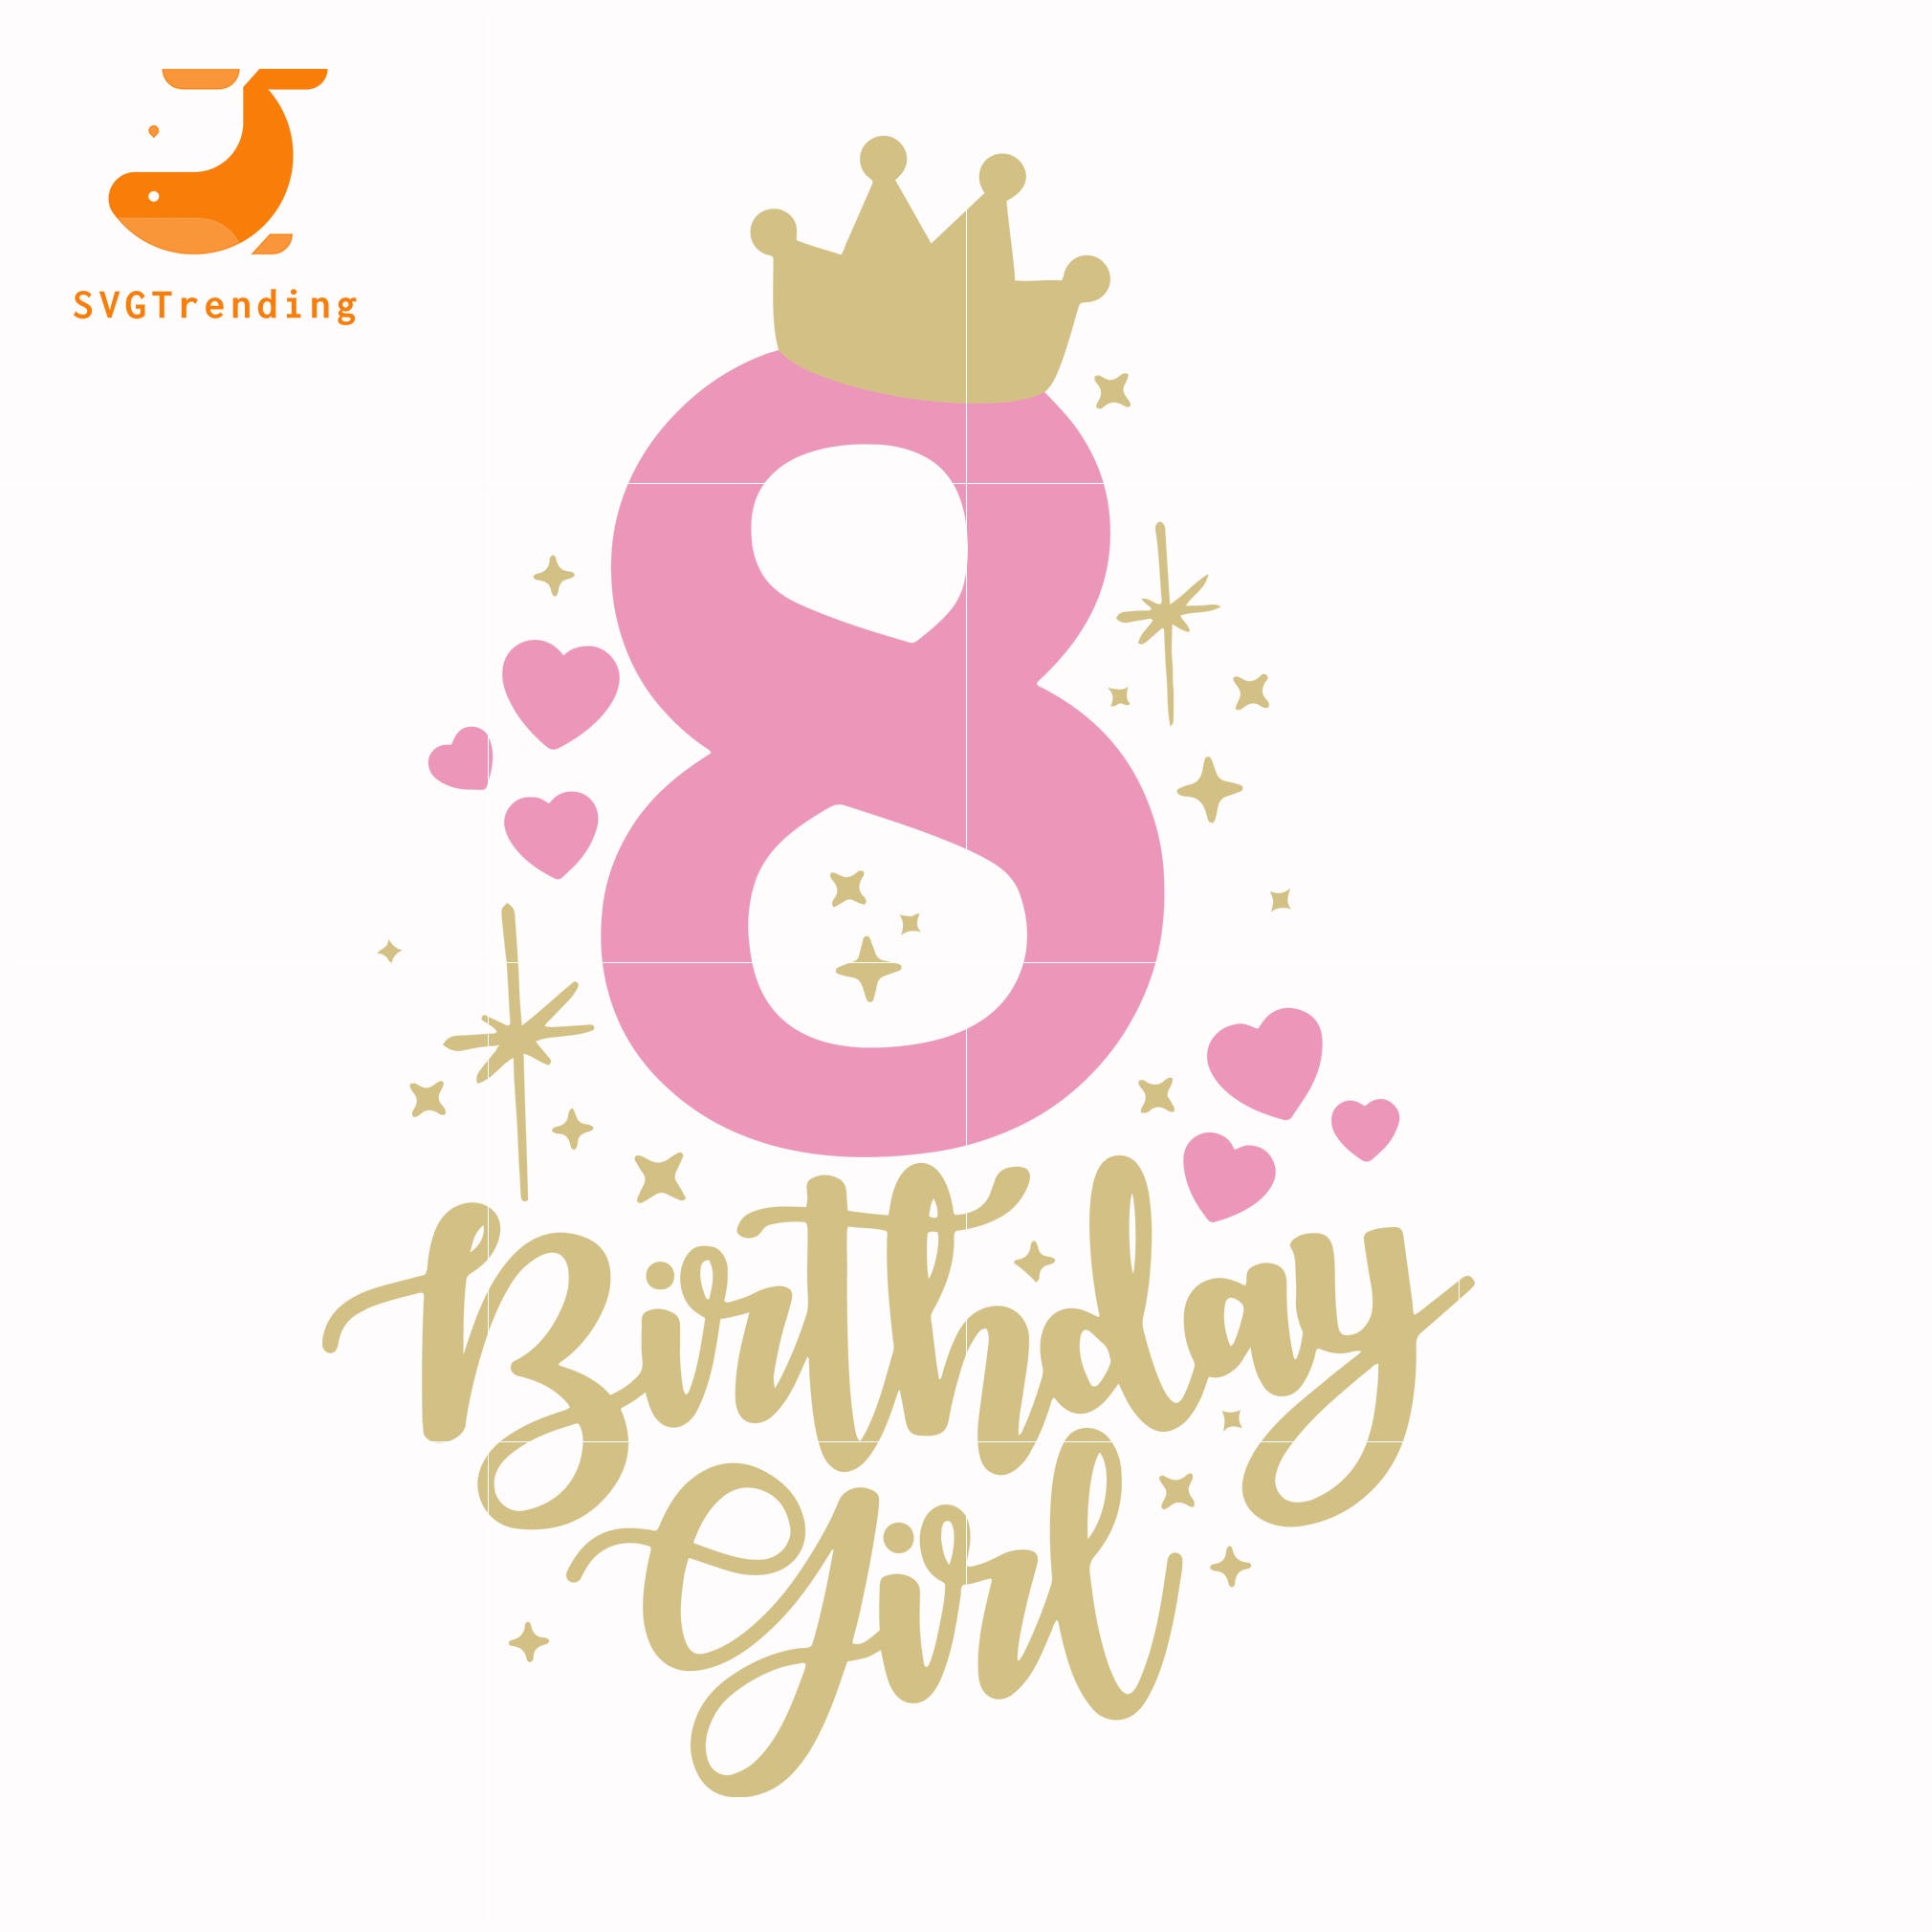 Girls Birthday Svg Cut Print File Eight Svg Dxf Eps Png Jpg Vector Clipart Eight Svg 8th Birthday Svg Eighth Birthday Svg Unicorn Svg Clip Art Art Collectibles